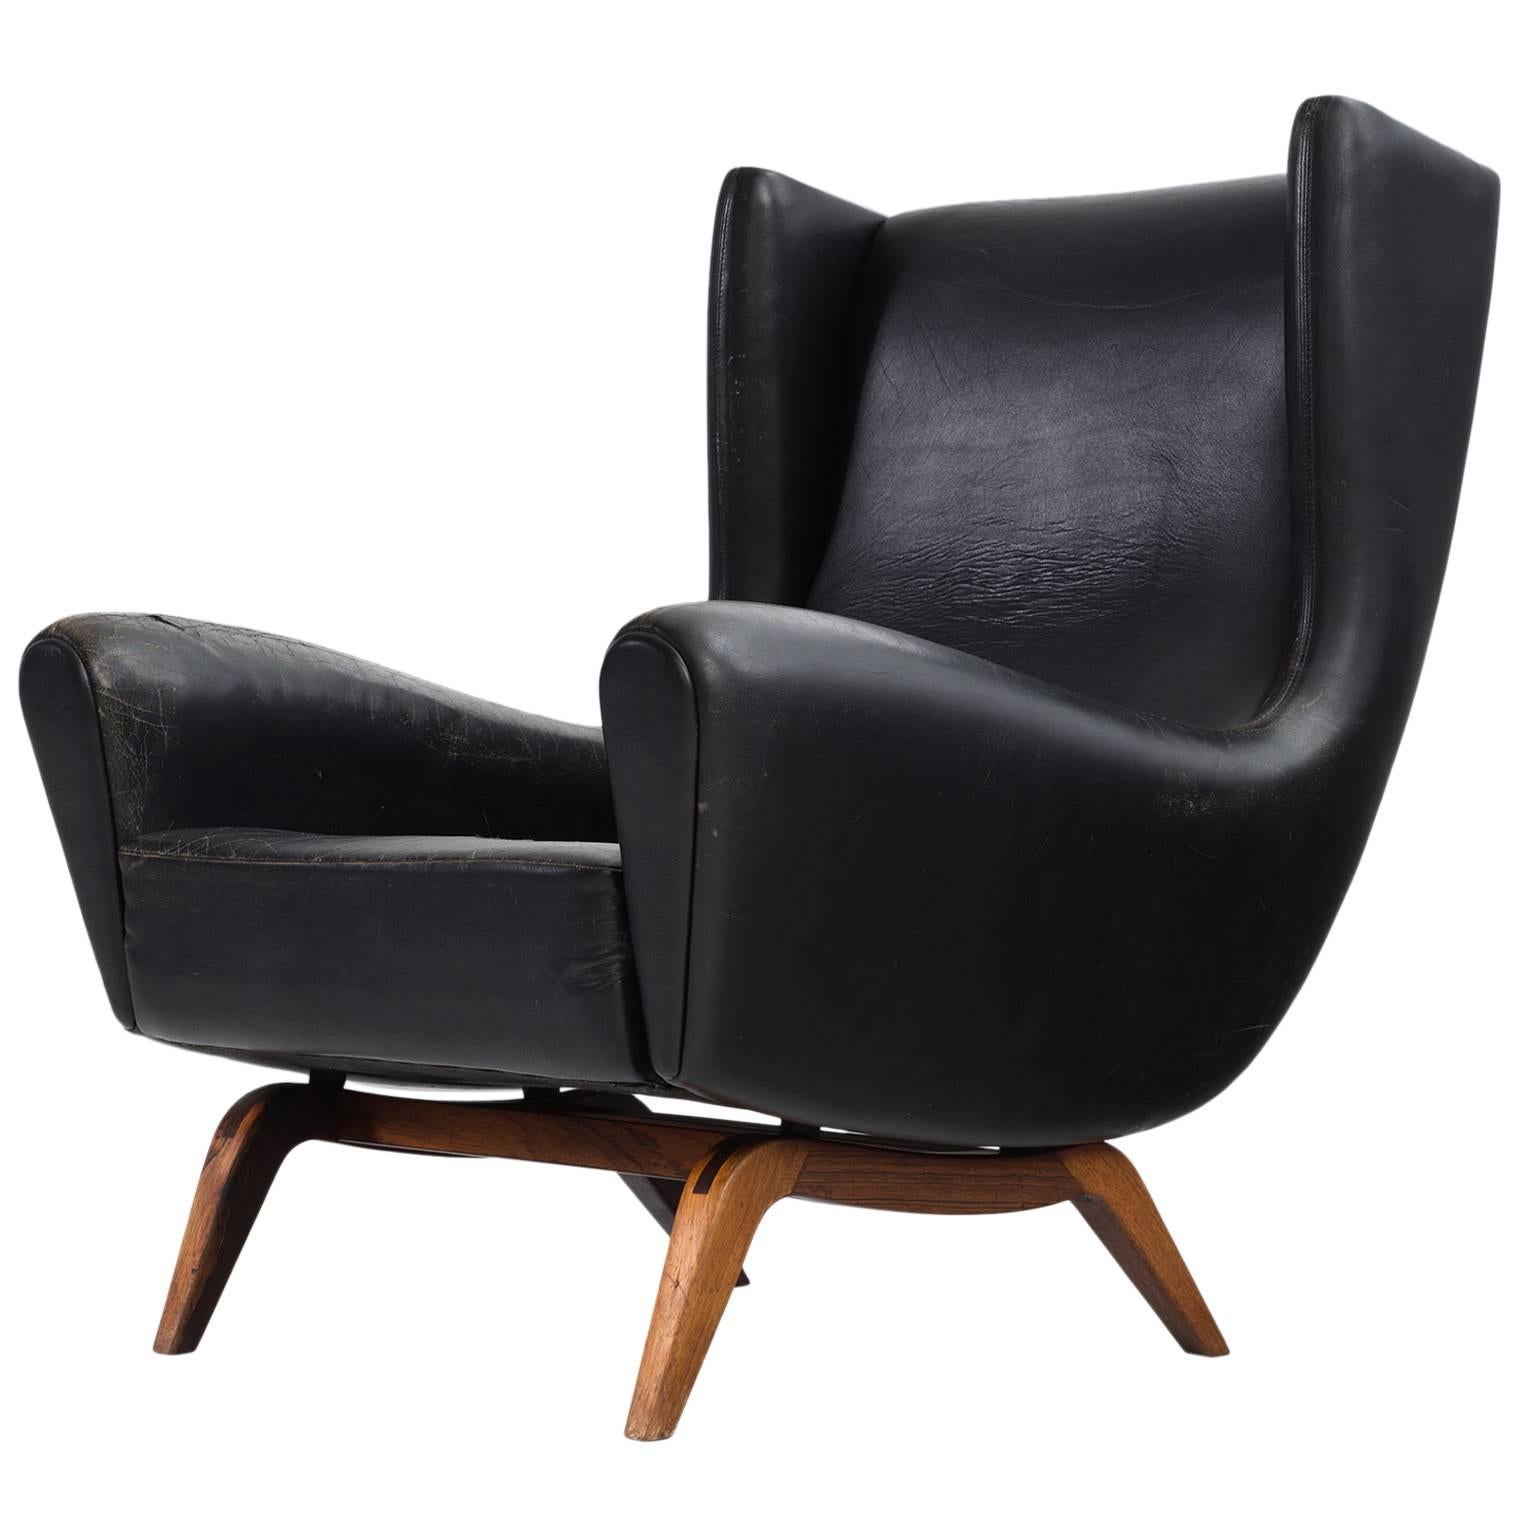 Illum Wikkelsø '110' Lounge Chair in Black Leather and Rosewood